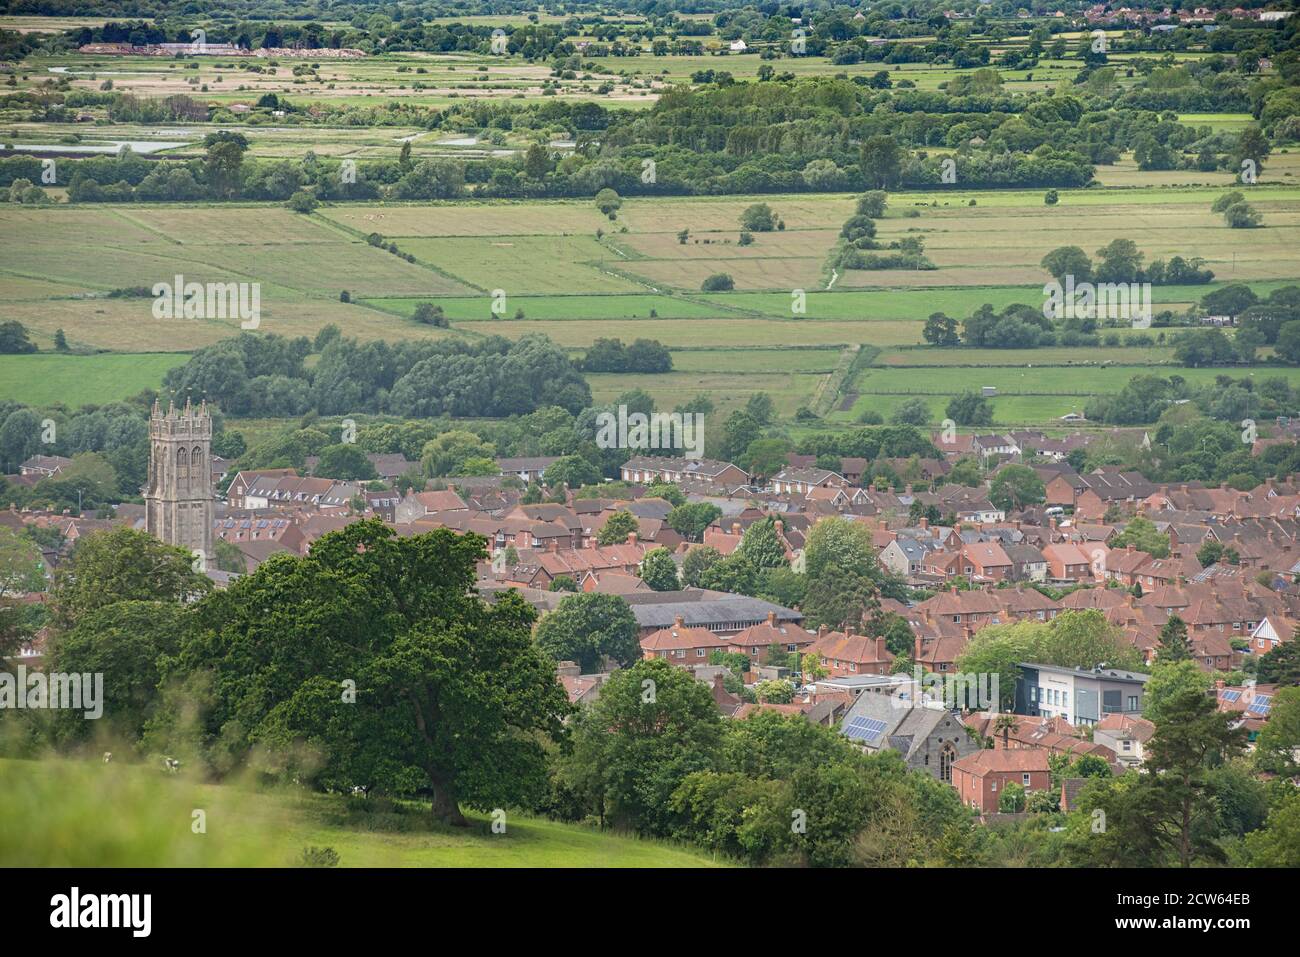 Glastonbury town seen from a local hilltop. Red roofs cluster in the township with surrounding hedged farmland. Pilgrimage site for New Agers. Stock Photo